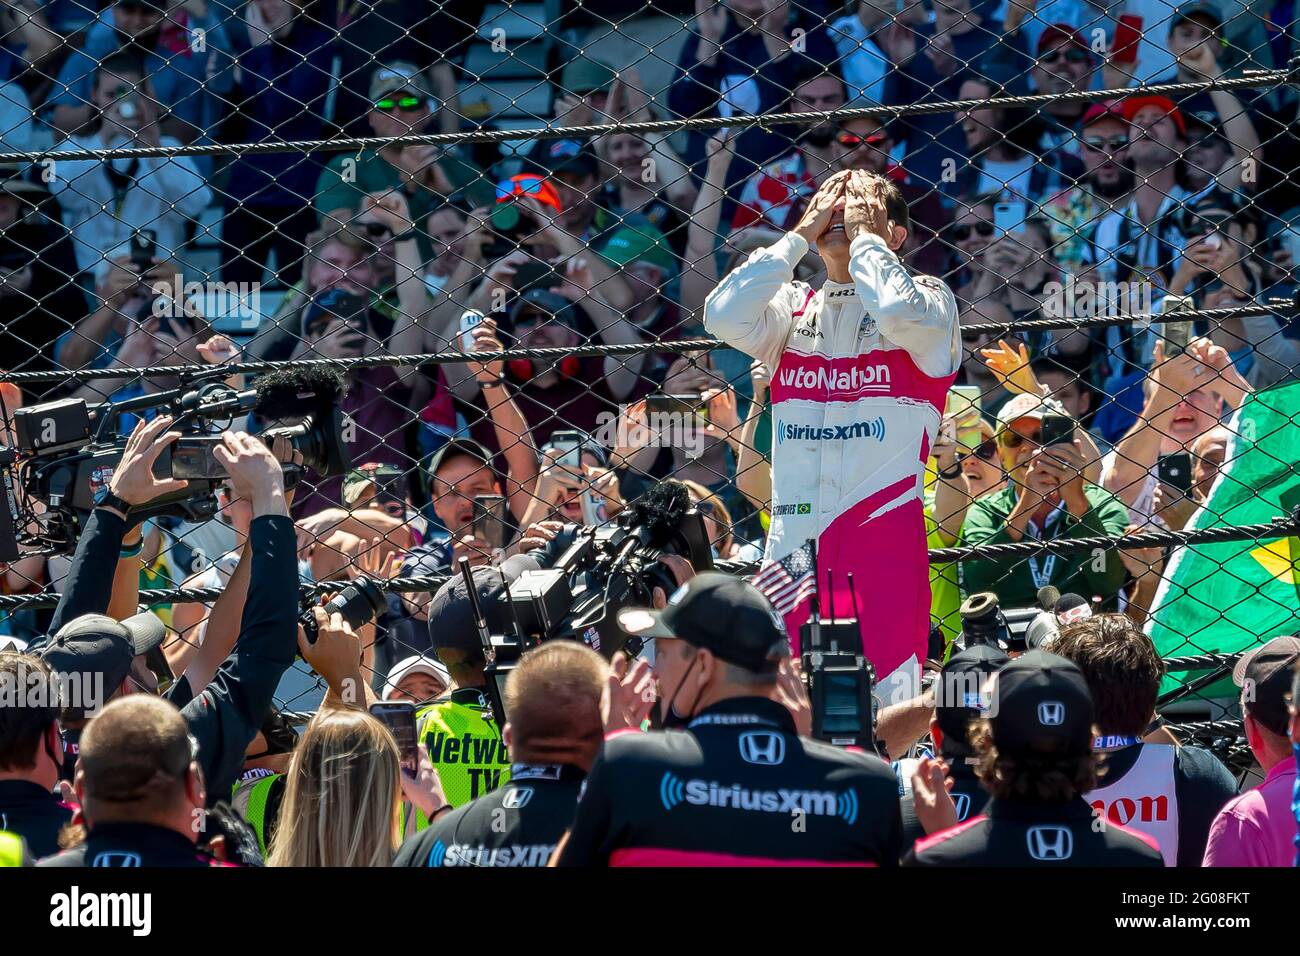 Indianapolis, Indiana, USA. 30th May, 2021. HELIO CASTRONEVES (06) of Sao Paulo, Brazil wins the 105th Running of The Indianapolis 500 at the Indianapolis Motor Speedway in Indianapolis, Indiana. Credit: Eddie Hurskin Grindstone Media/ASP/ZUMA Wire/Alamy Live News Stock Photo